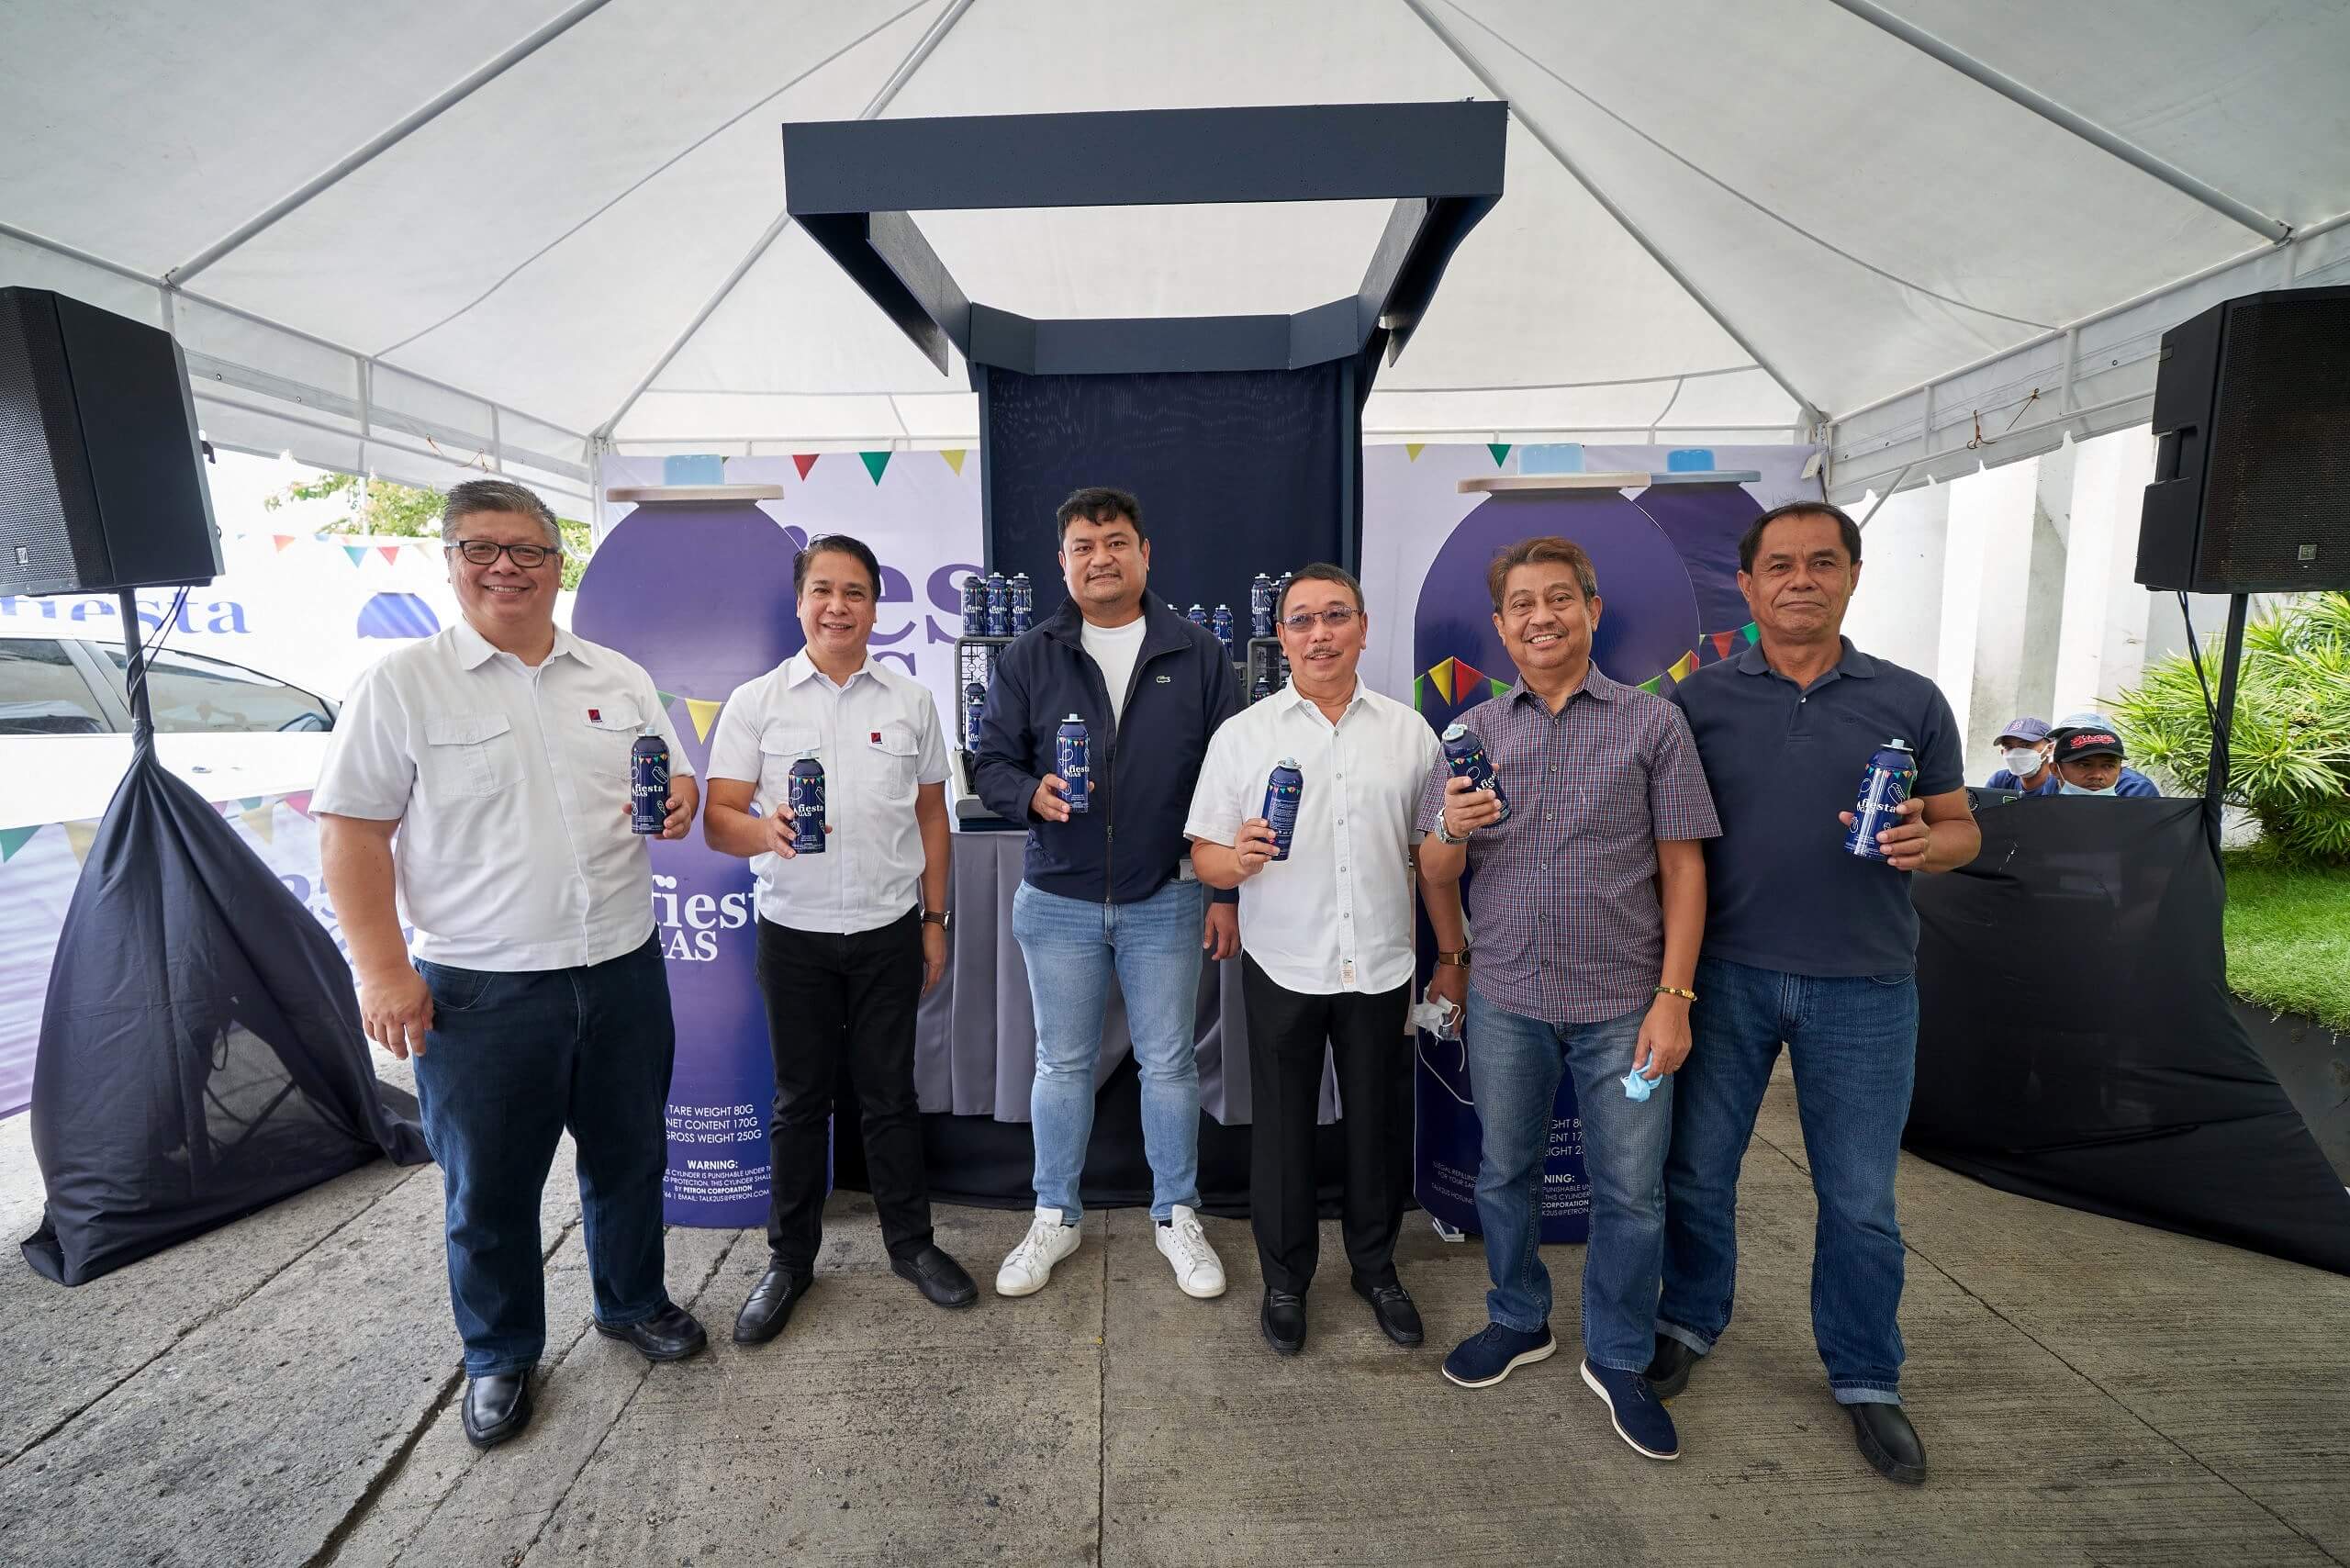 Petron launches LPG-refillable small cylinder by Fiesta Gas in Cebu